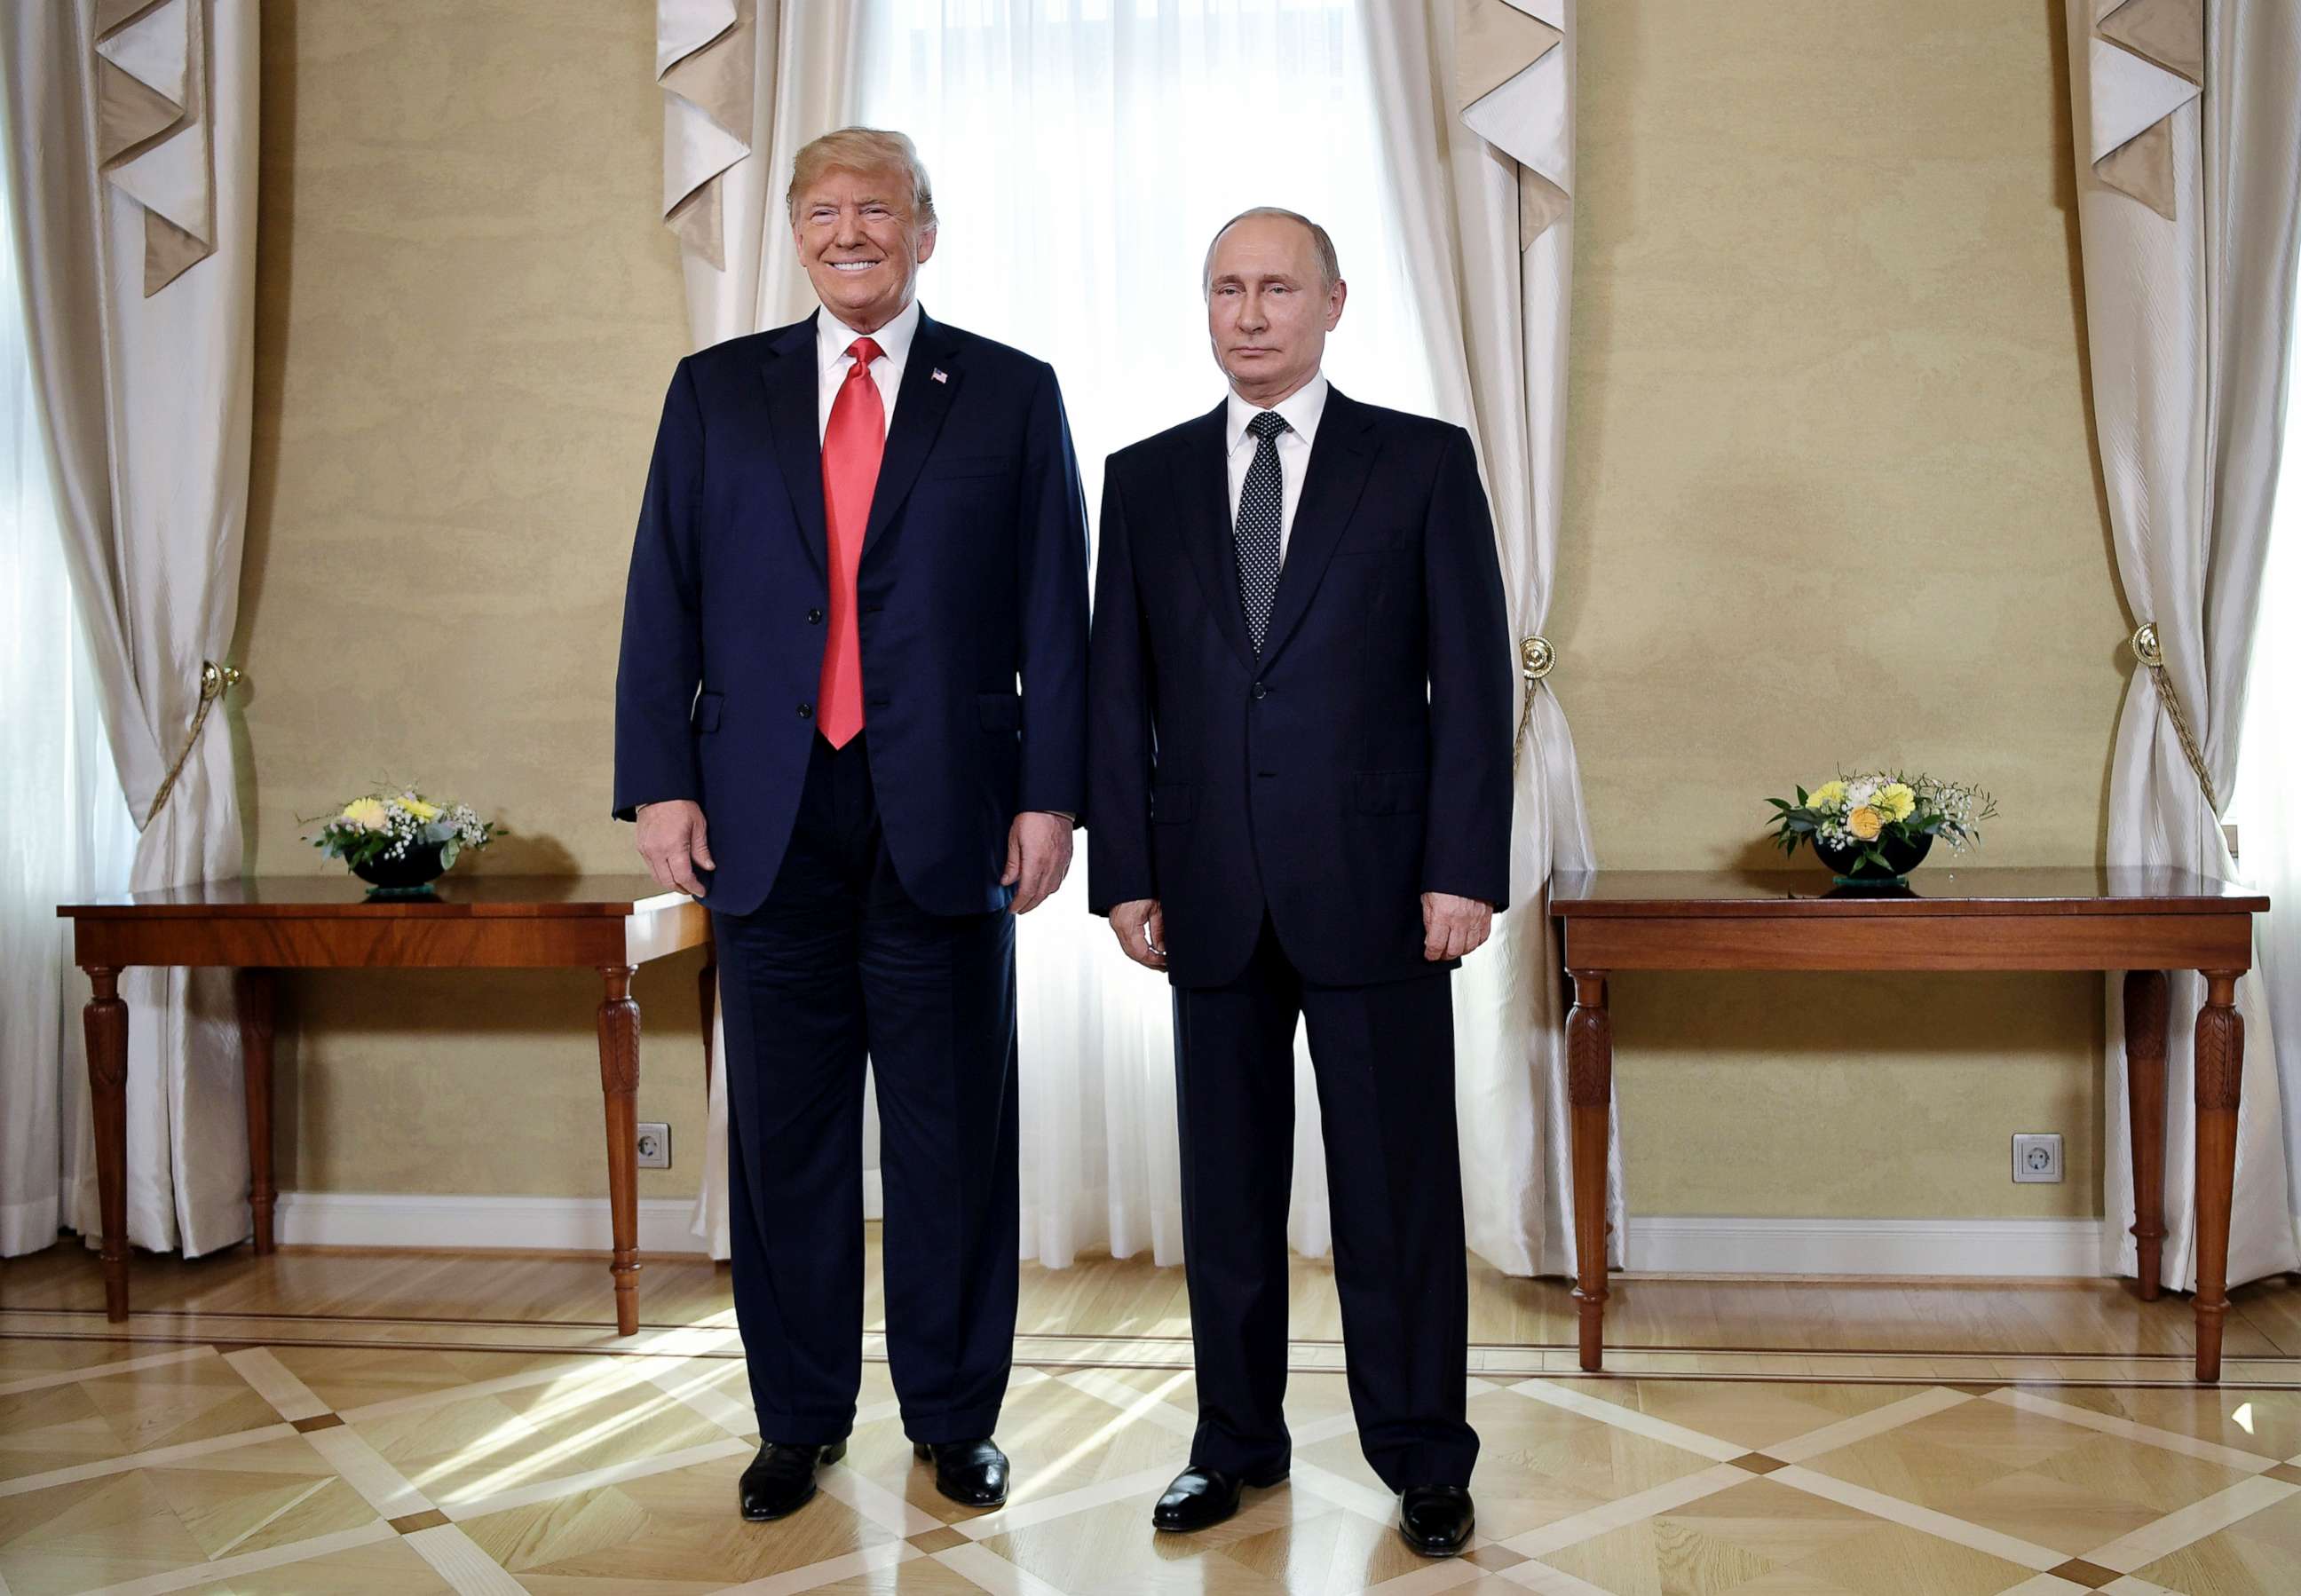 PHOTO: President Donald Trump and Russian President Vladimir Putin at the Presidential Palace in Helsinki, Finland, July 16, 2018 prior to Trump's and Putin's one-on-one meeting in the Finnish capital.